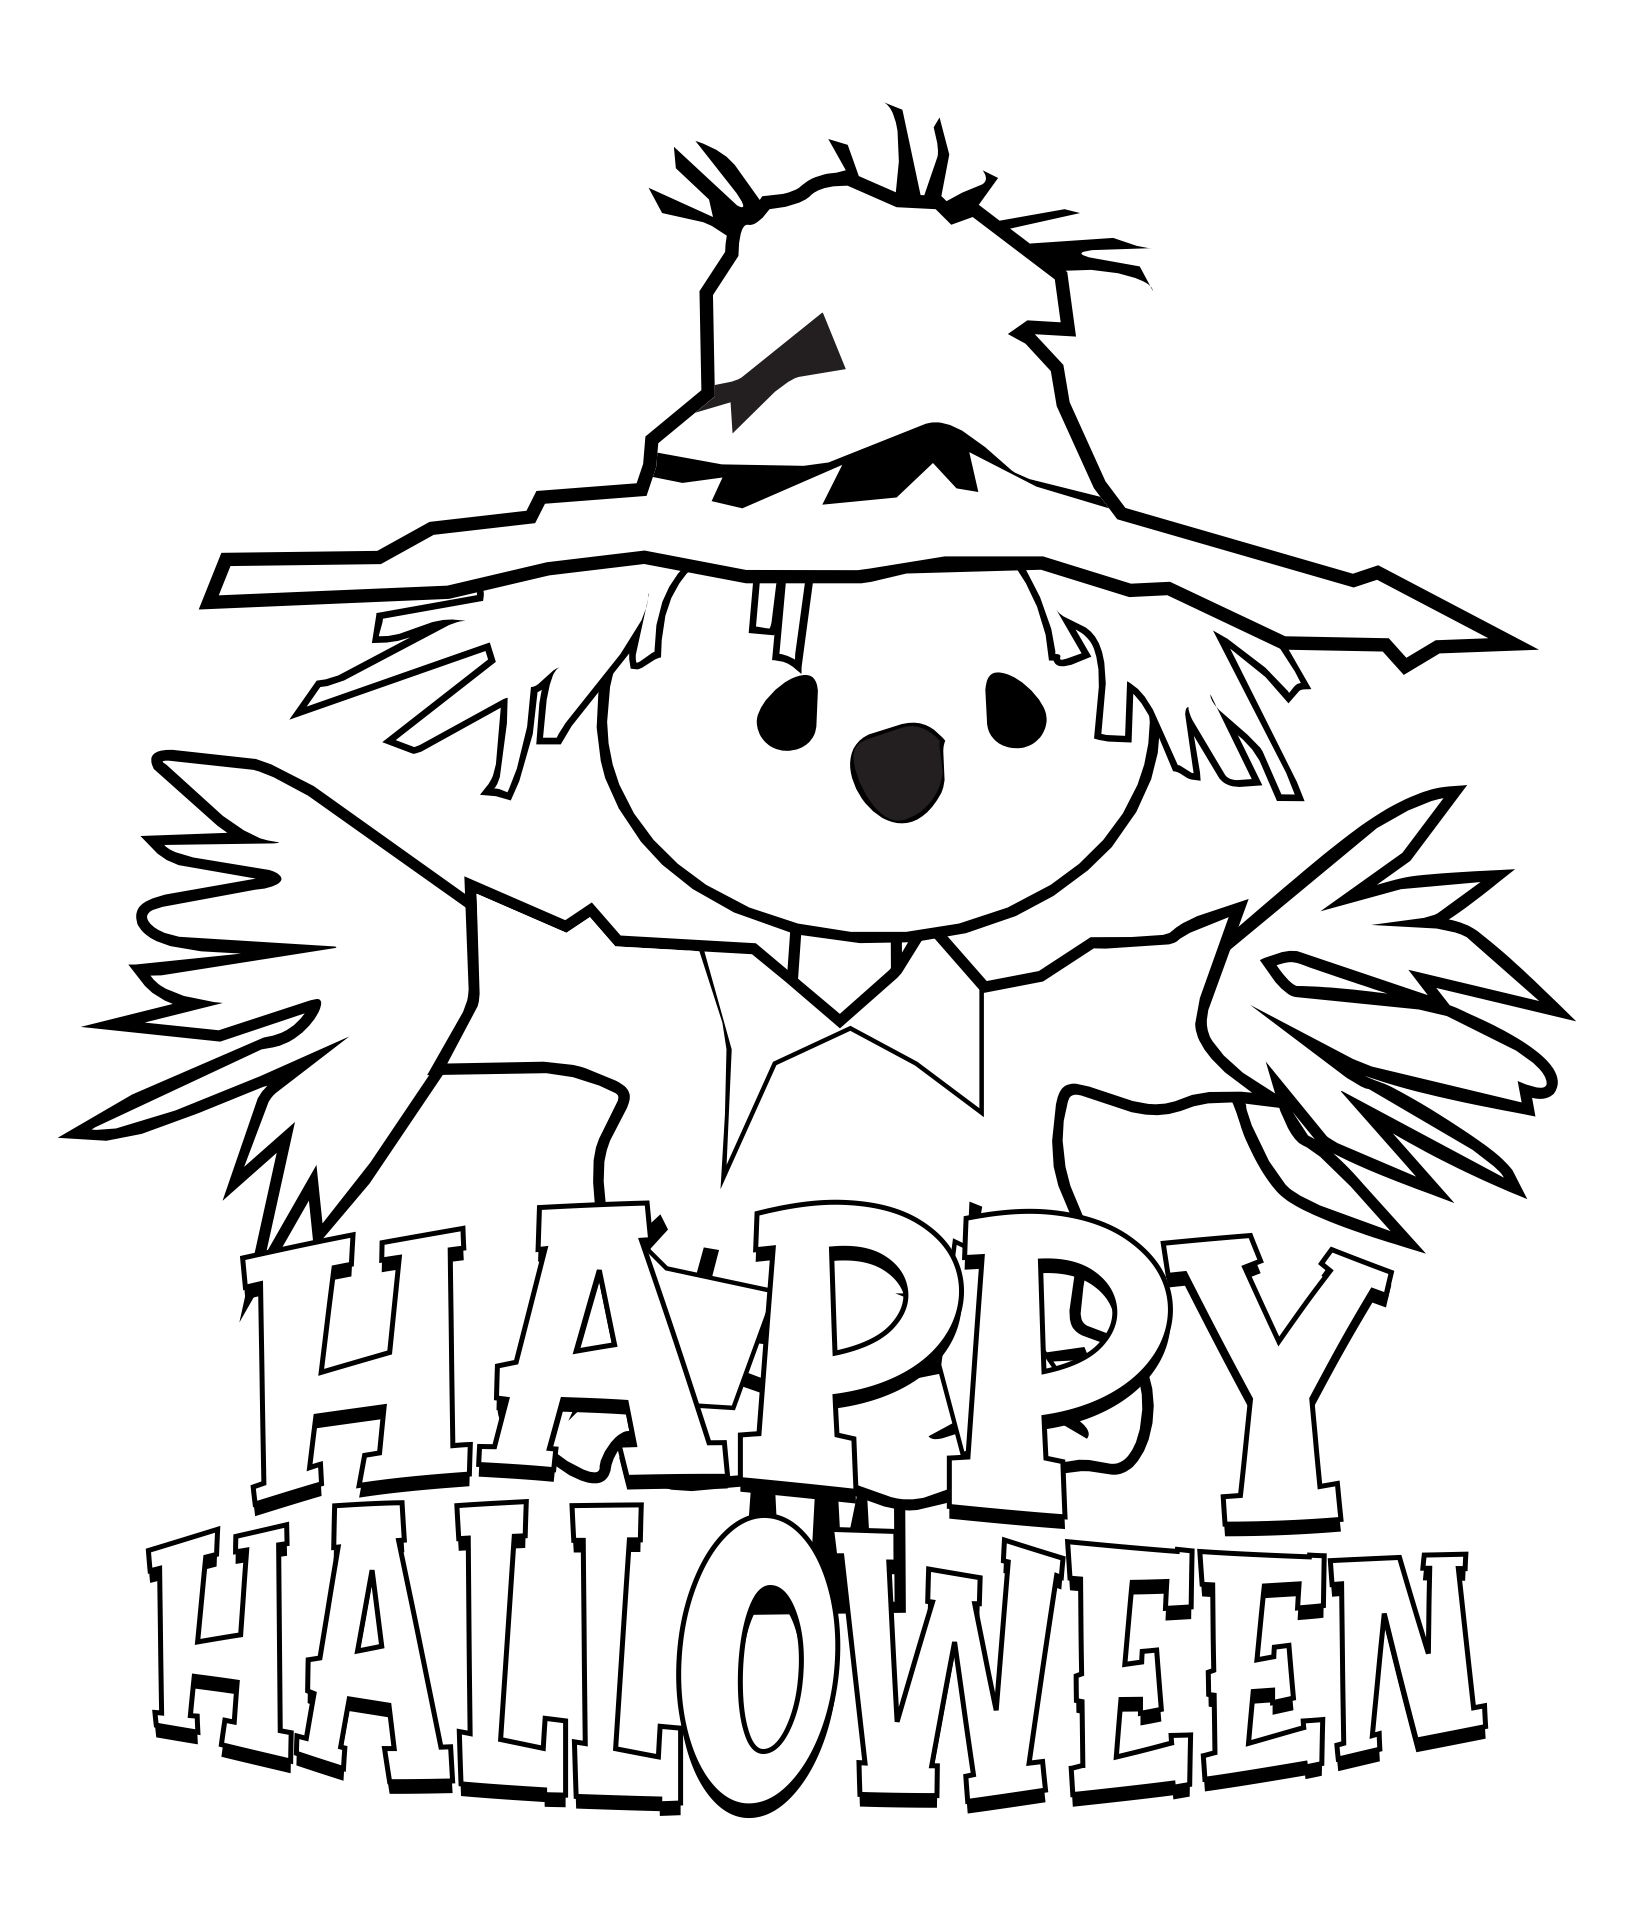 Free Printable Halloween Coloring Pages